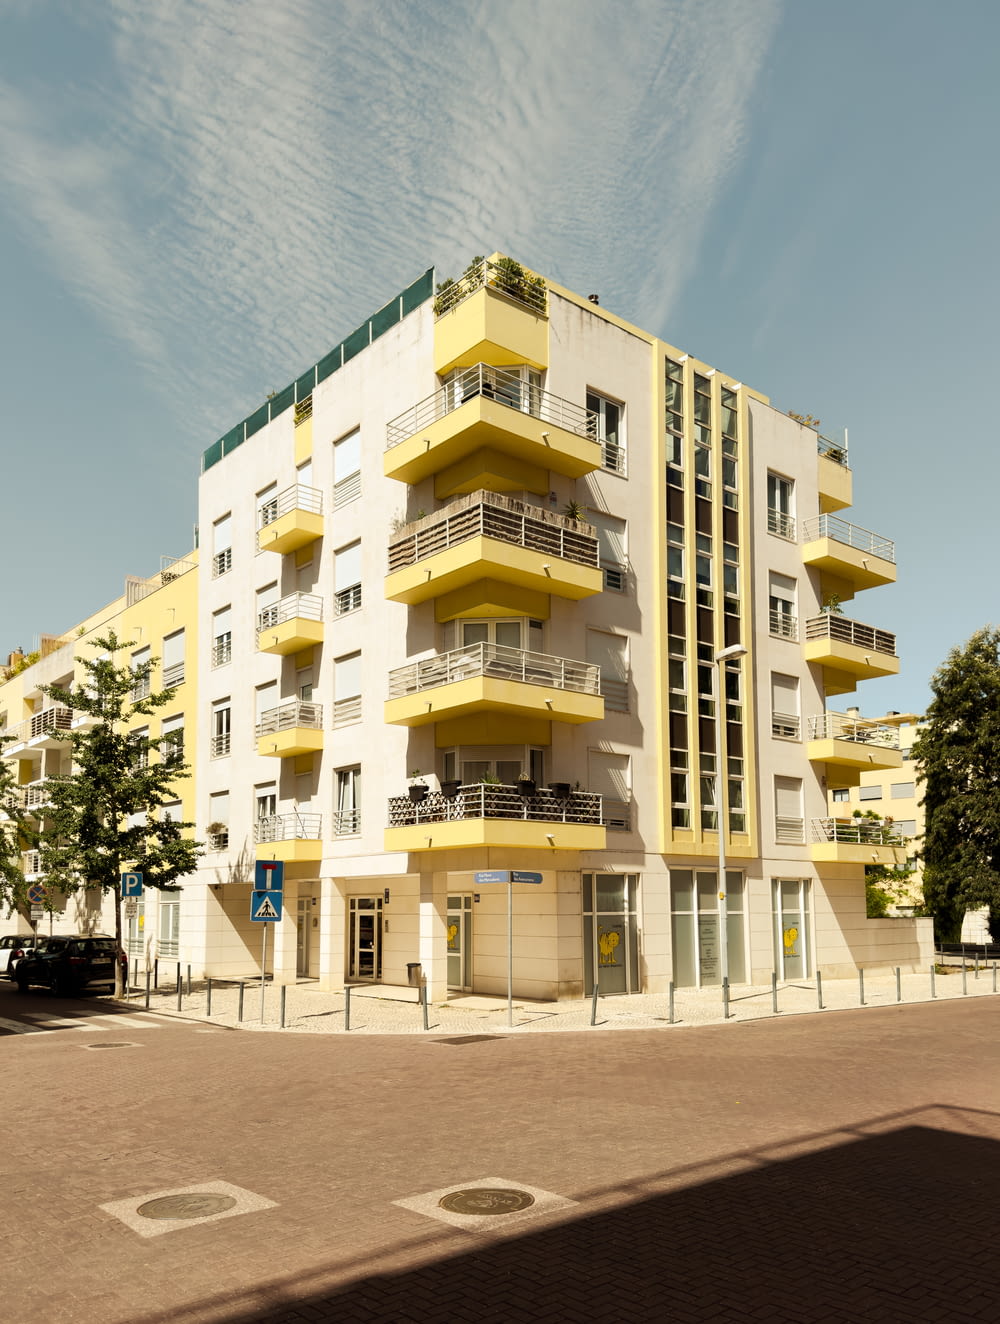 a yellow and white building with balconies and balconies